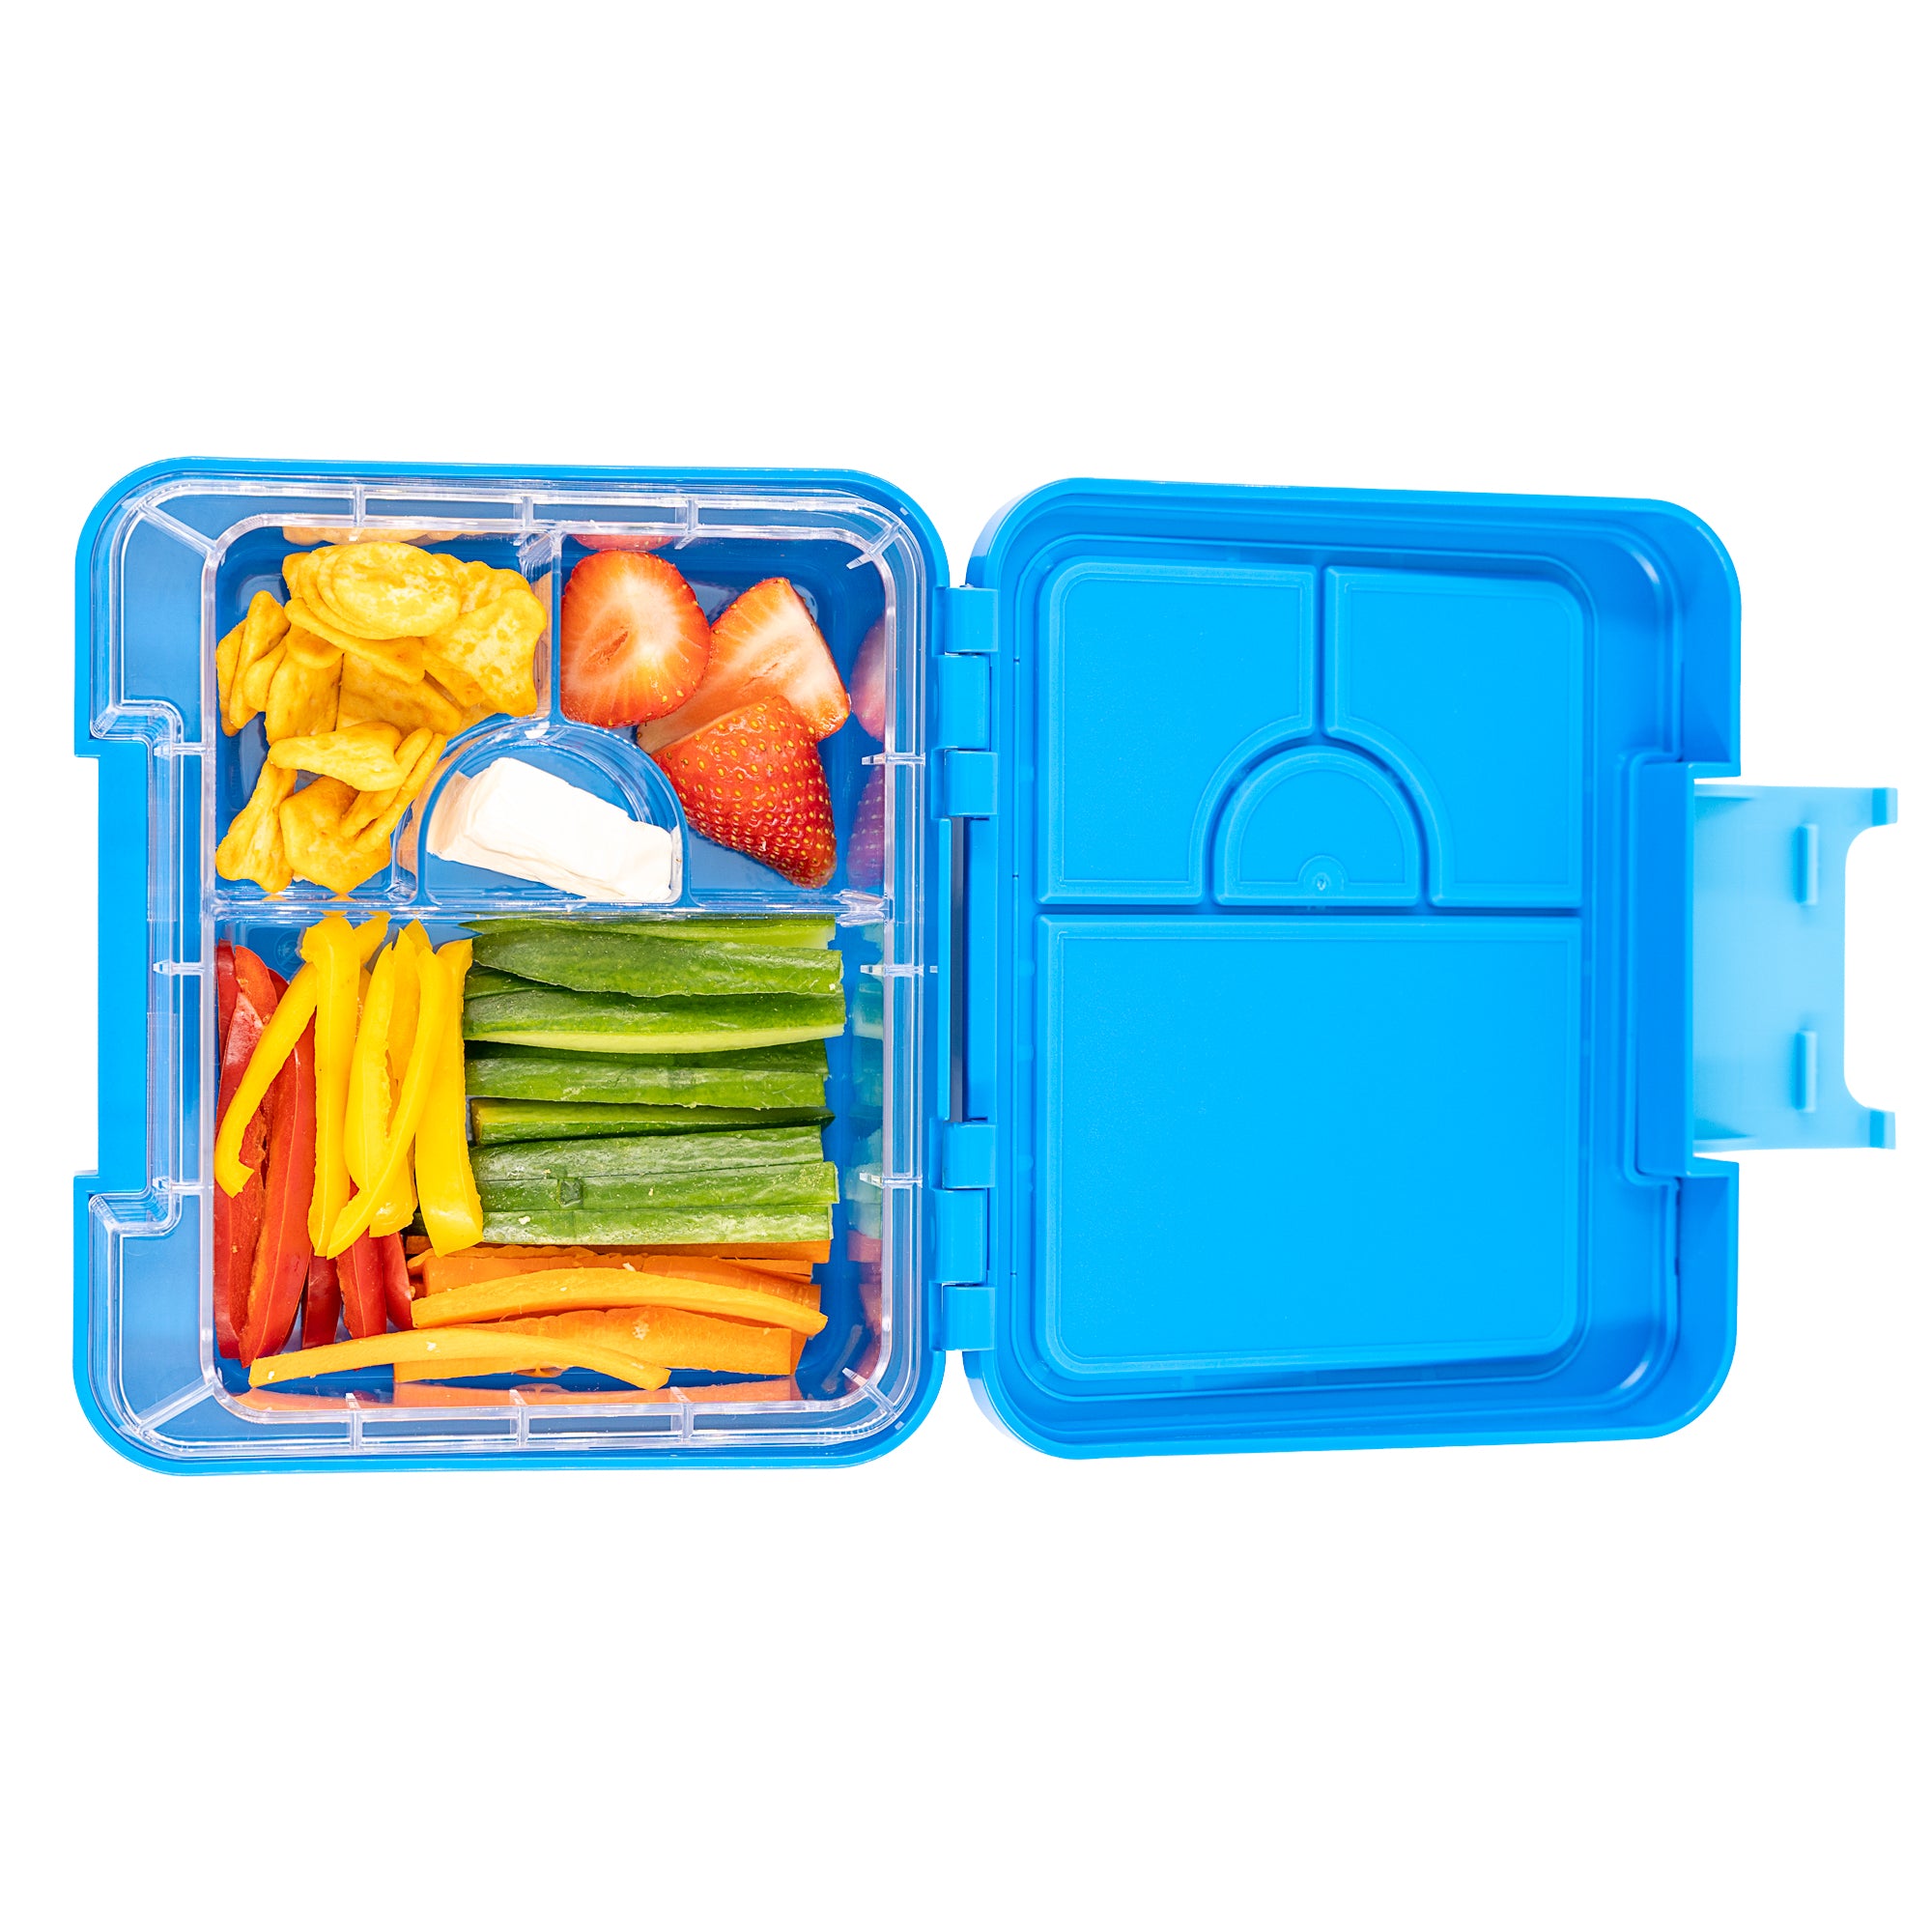 Bento Box Mini Snack Neptune Blue for kids Lunch box Food Graded Materials  BPA FREE & LEAK PROOF| Made of Triton (Neptune Blue Space man) by Snack